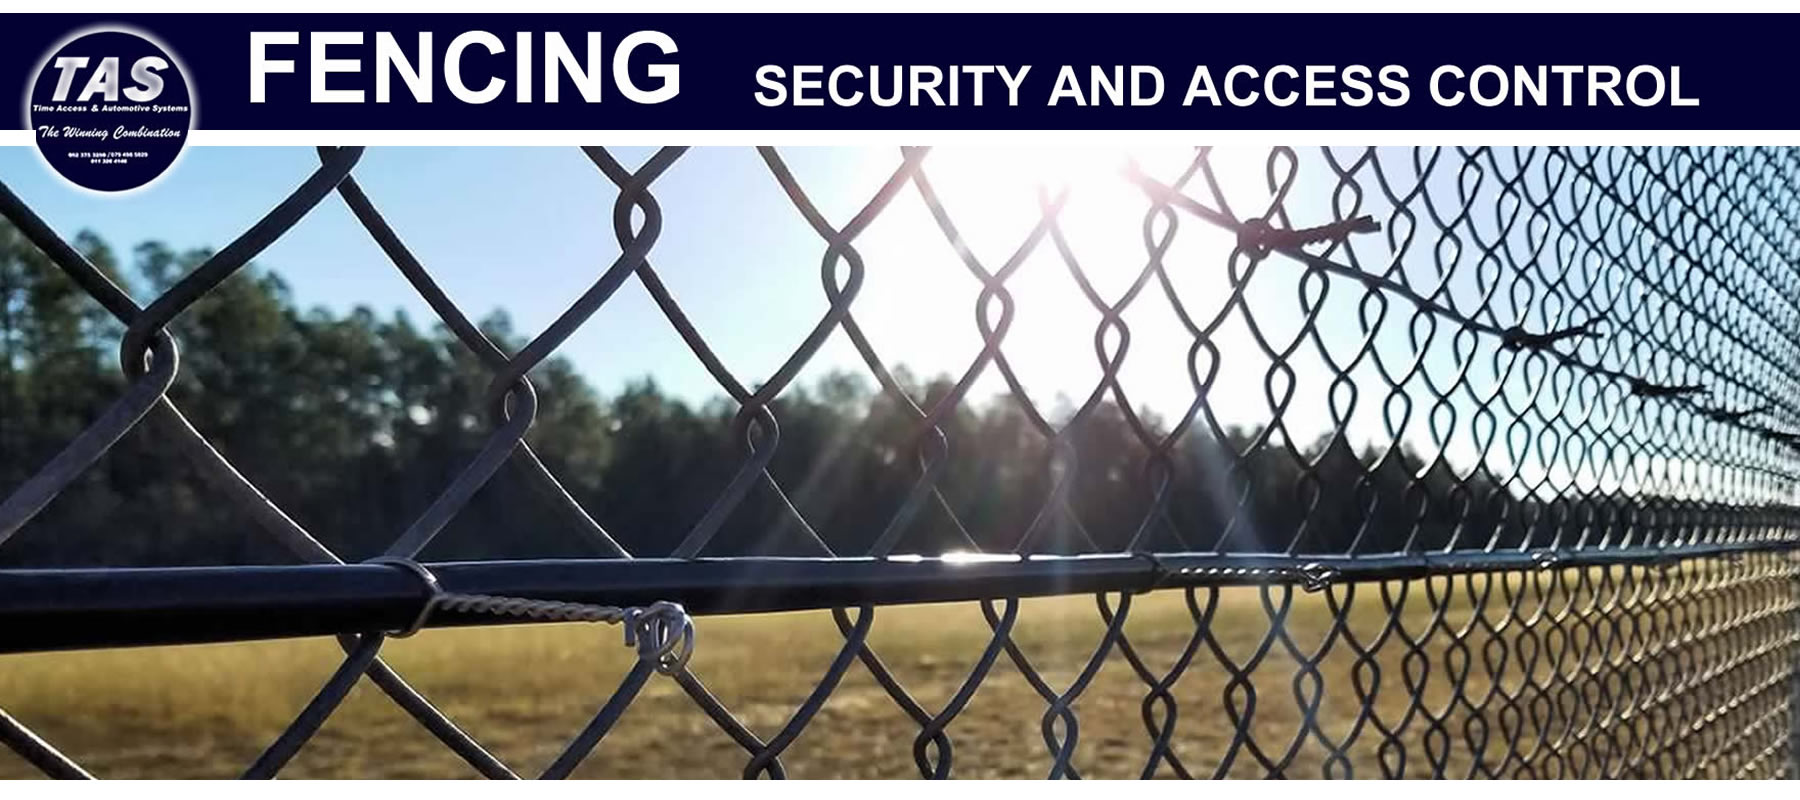 fencing security control banner